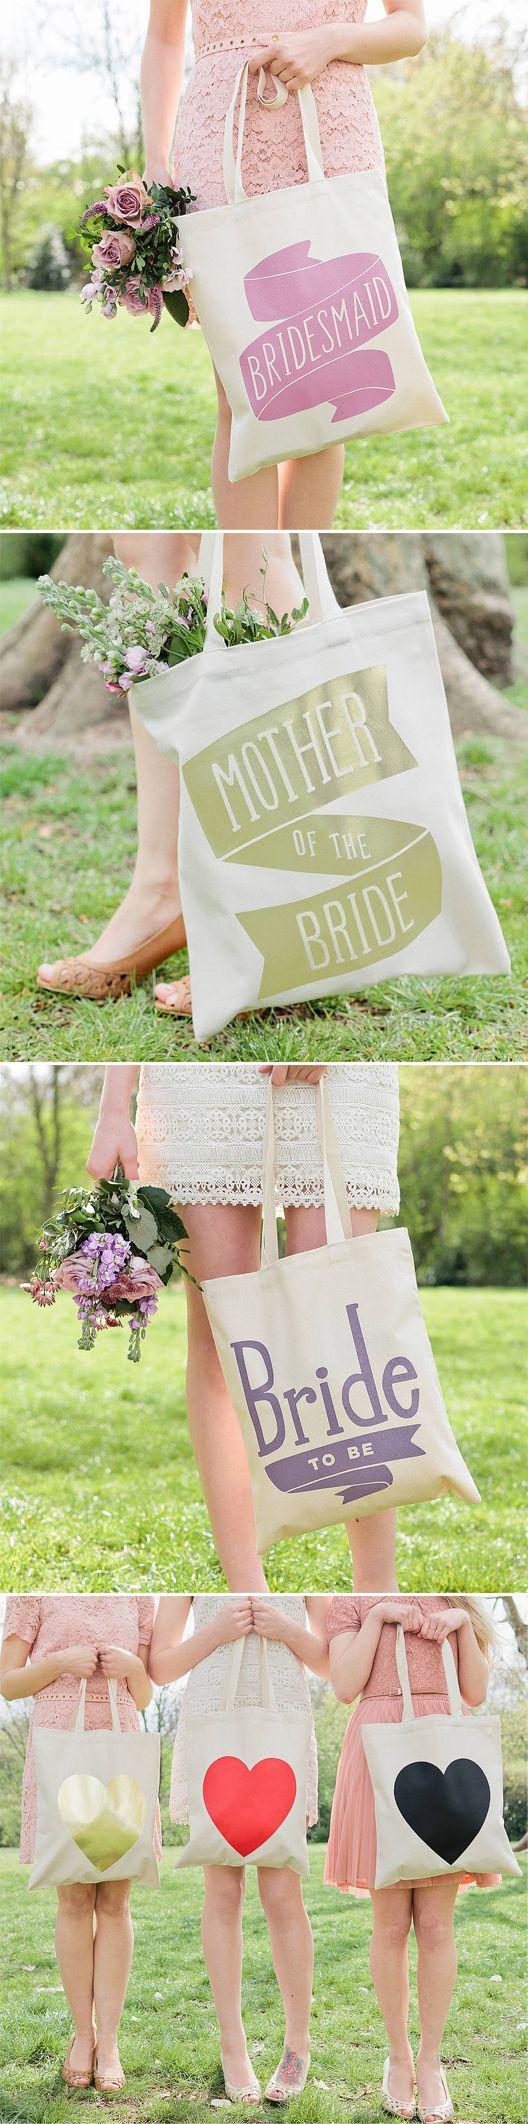 Wedding - Bridal Party Gifts That Won’t Collect Dust